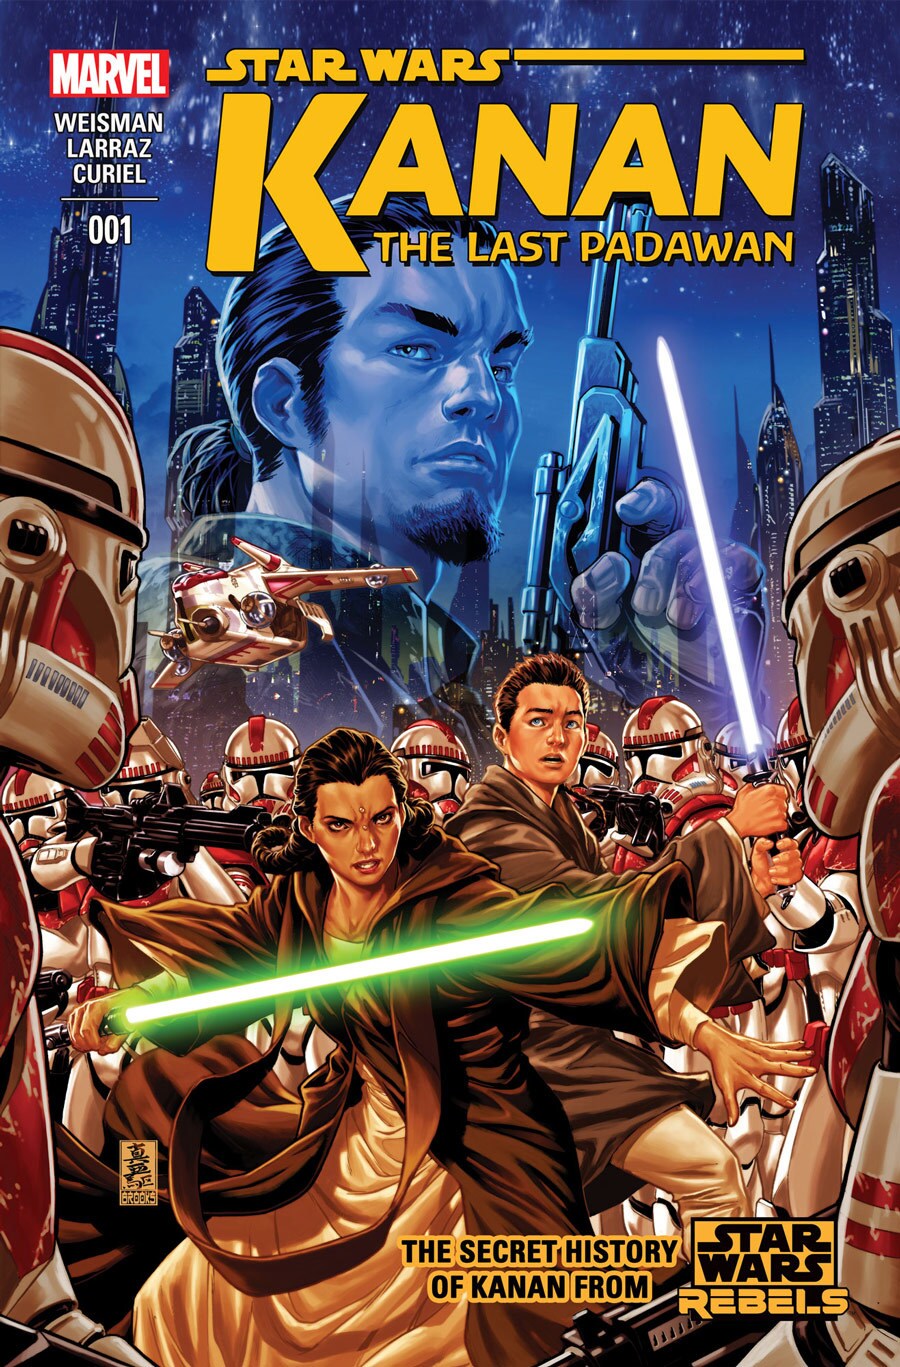 The cover of the first issue of Star Wars Kanan the Last Padawan features Kanan with his Jedi Master surrounded by stormtroopers.